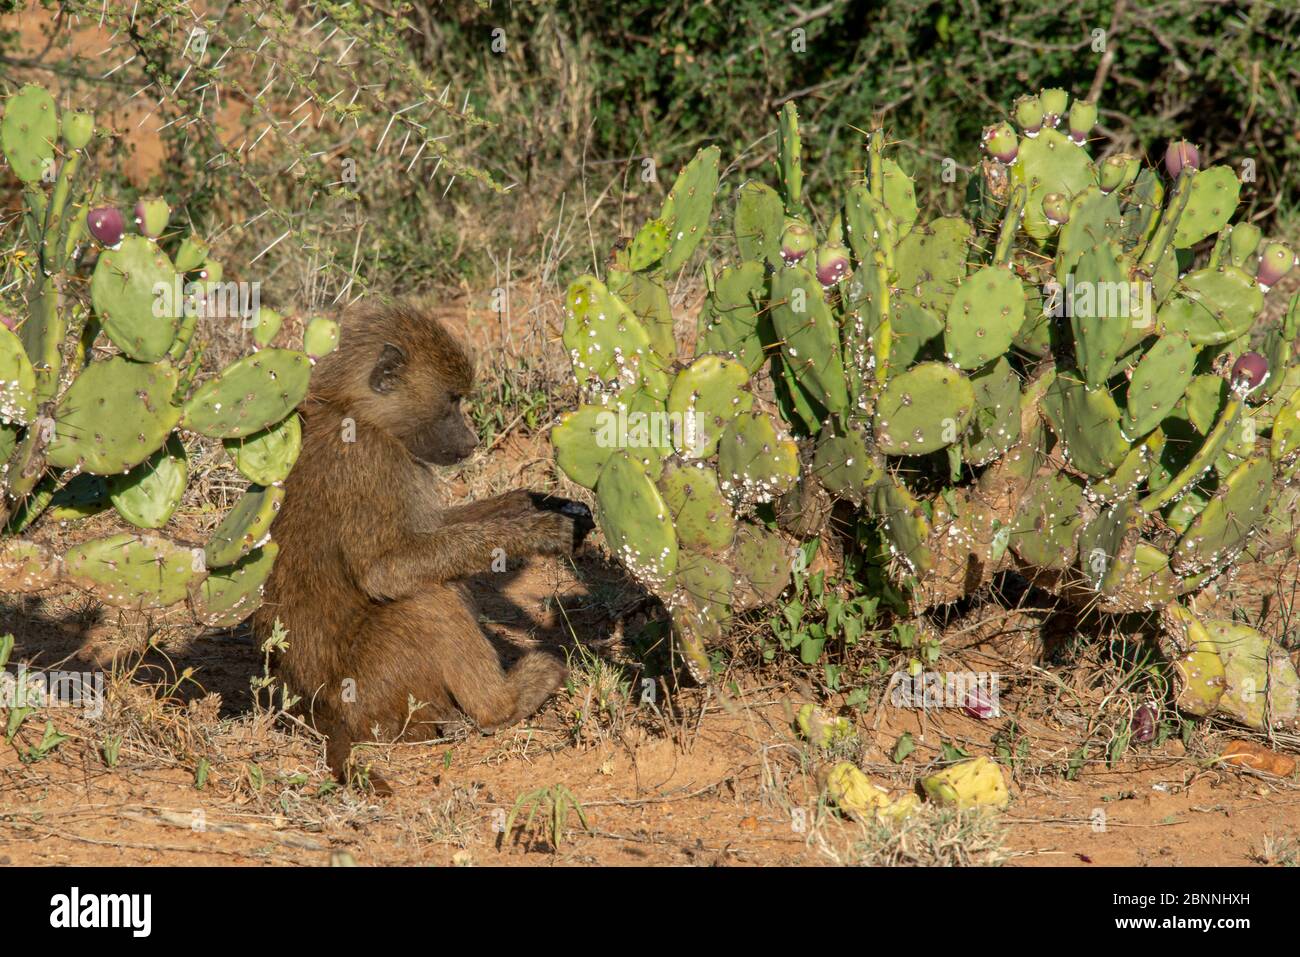 Baby baboon sitting near prickly pear cactus and eating the fruit from the cactus. Stock Photo